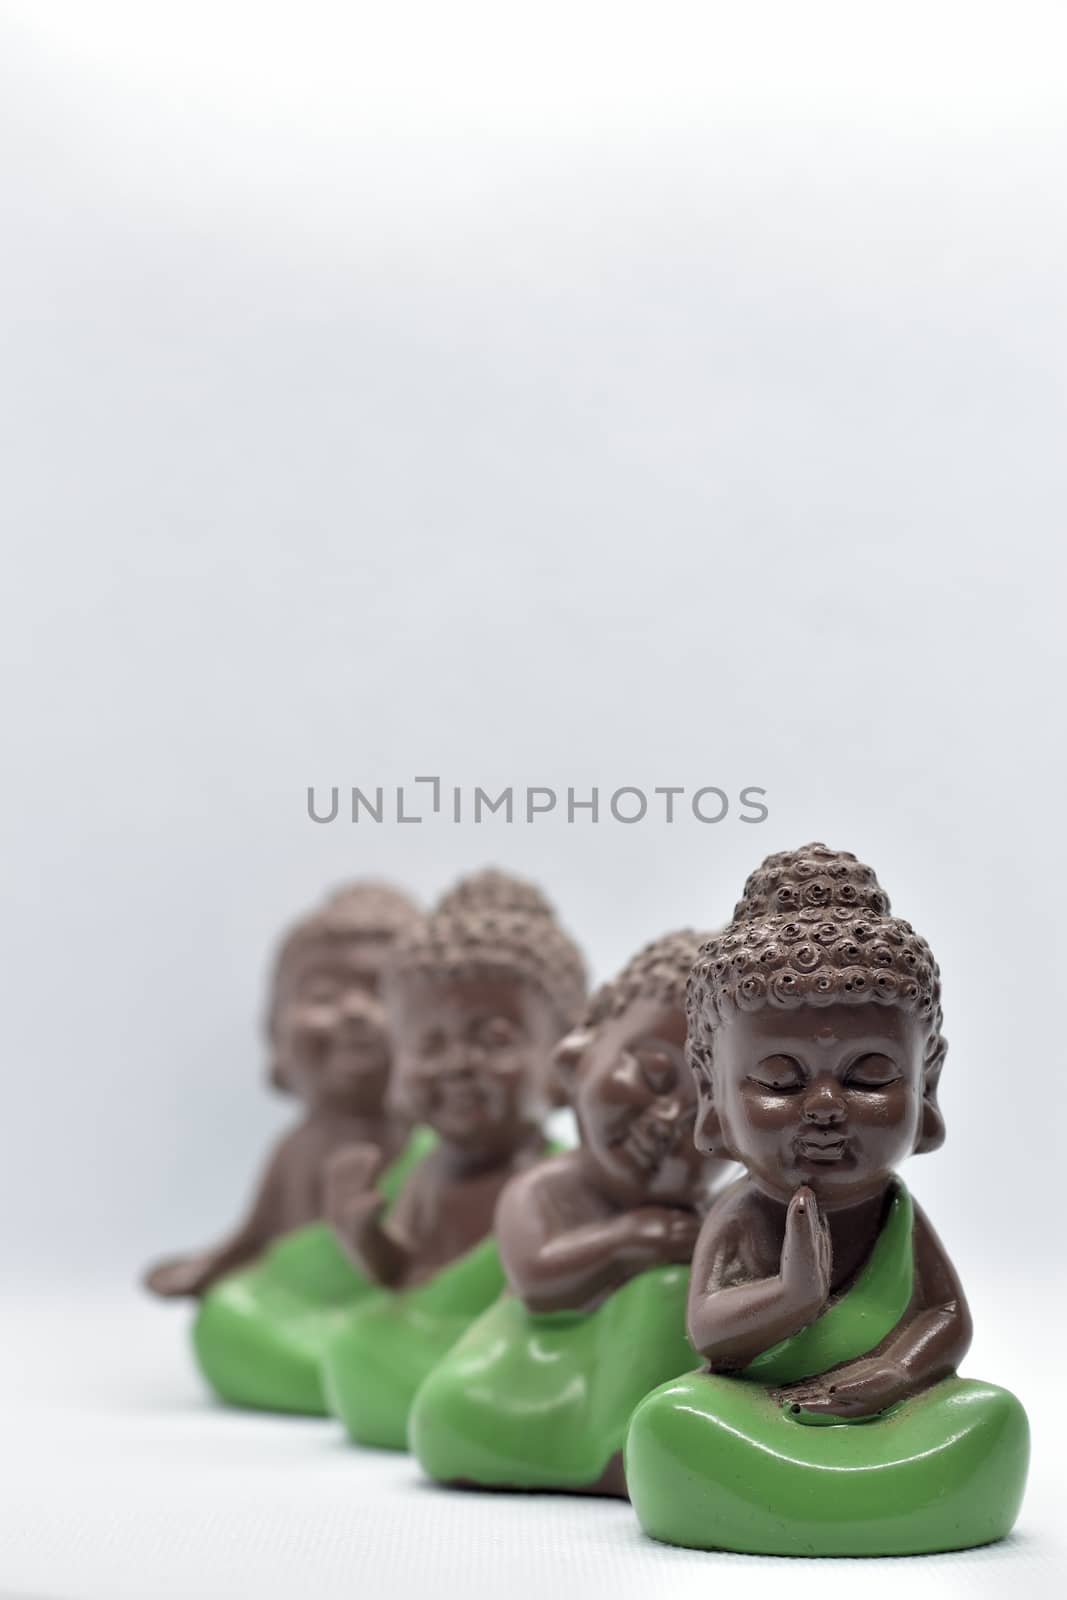 Four Chinese traditional little monk figure by rkbalaji